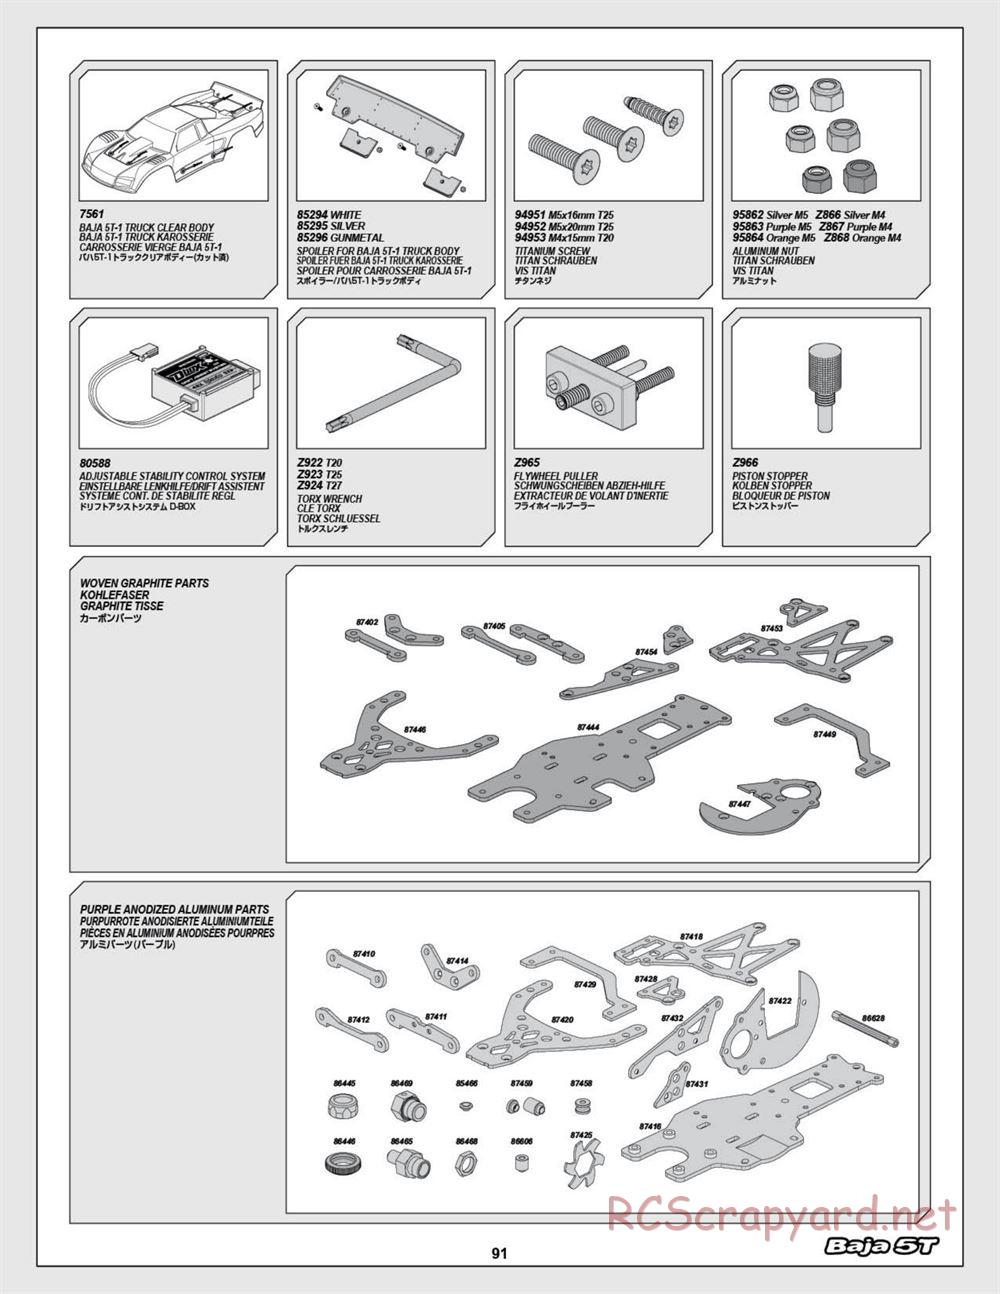 HPI - Baja 5T (2008) - Exploded View - Page 91